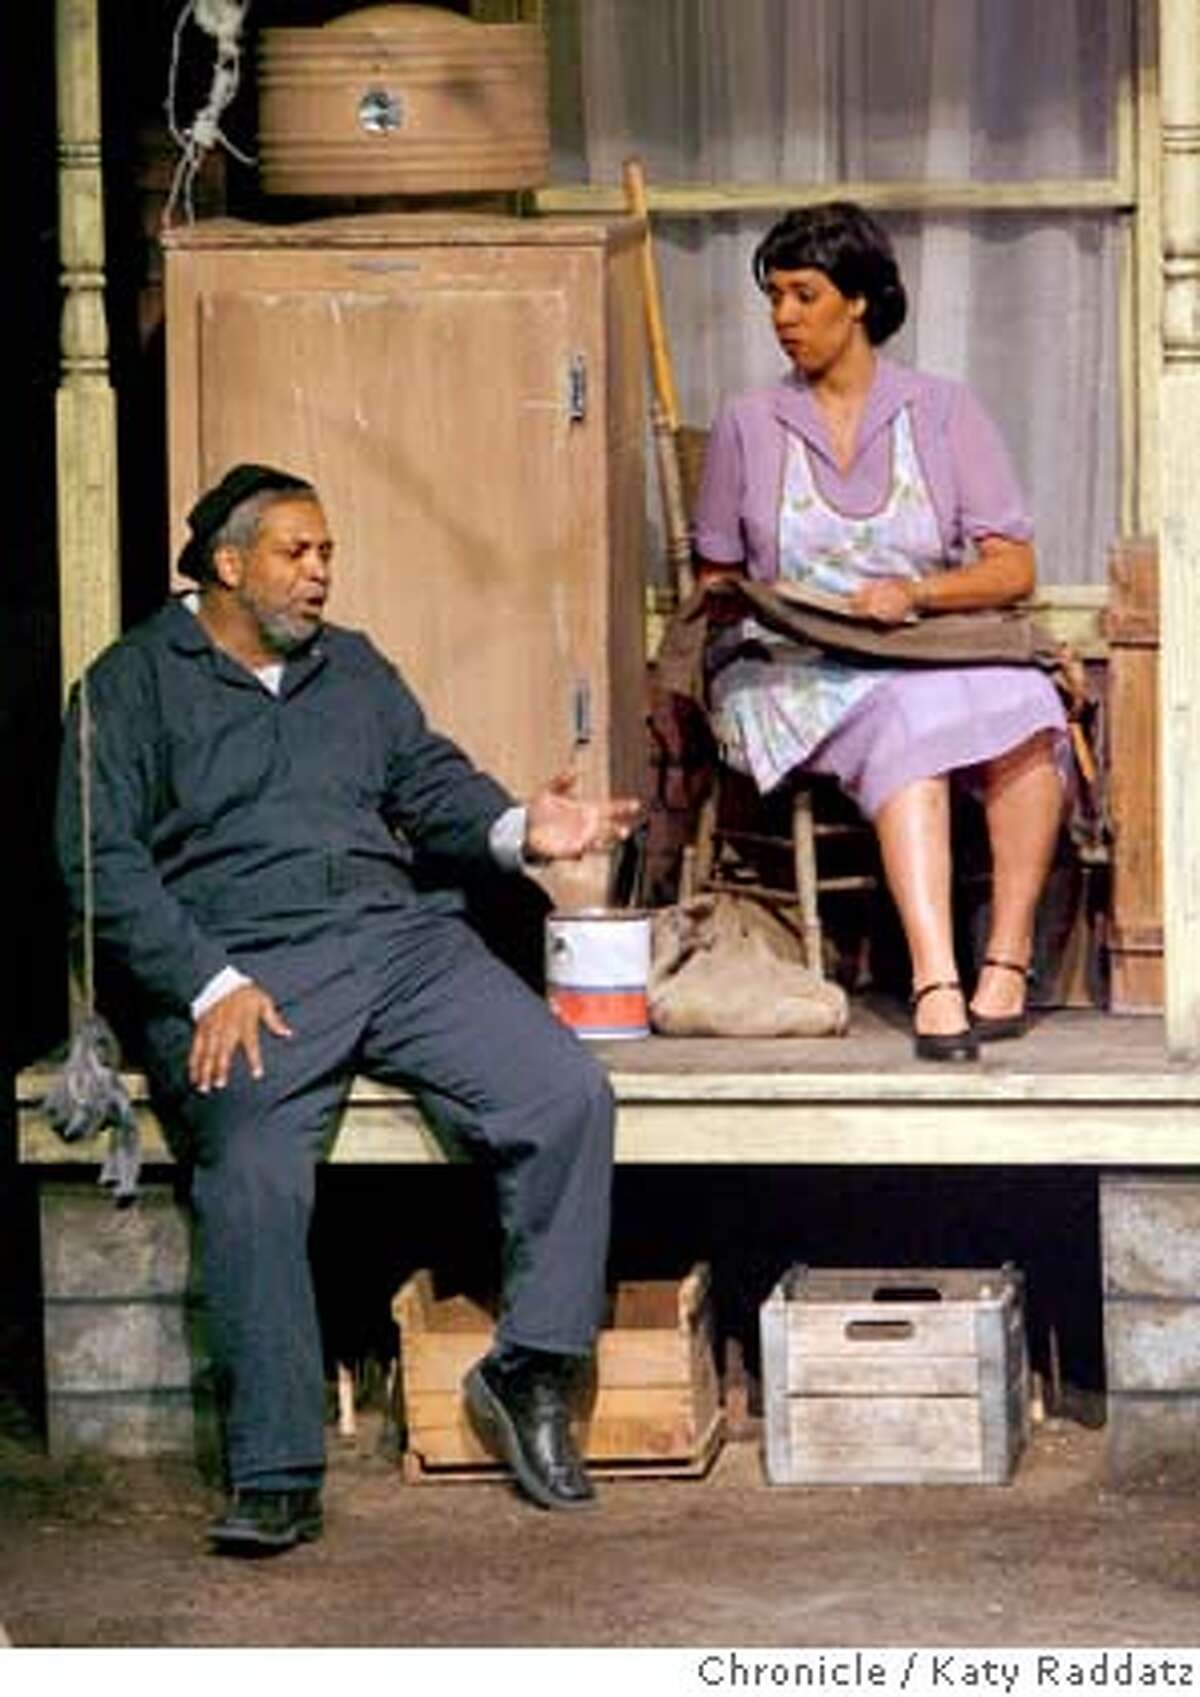 Troy Maxson, played by Alex Morris, left, and Rose, Troy's wife, played by Elizabeth Carter, right, argue in the first act of a preview performance of August Wilson's "Fences" at the Lorraine Hansberry Theater in San Francisco, Calif. on Thursday March 20, 2008. Photo by Katy Raddatz / San Francisco Chronicle